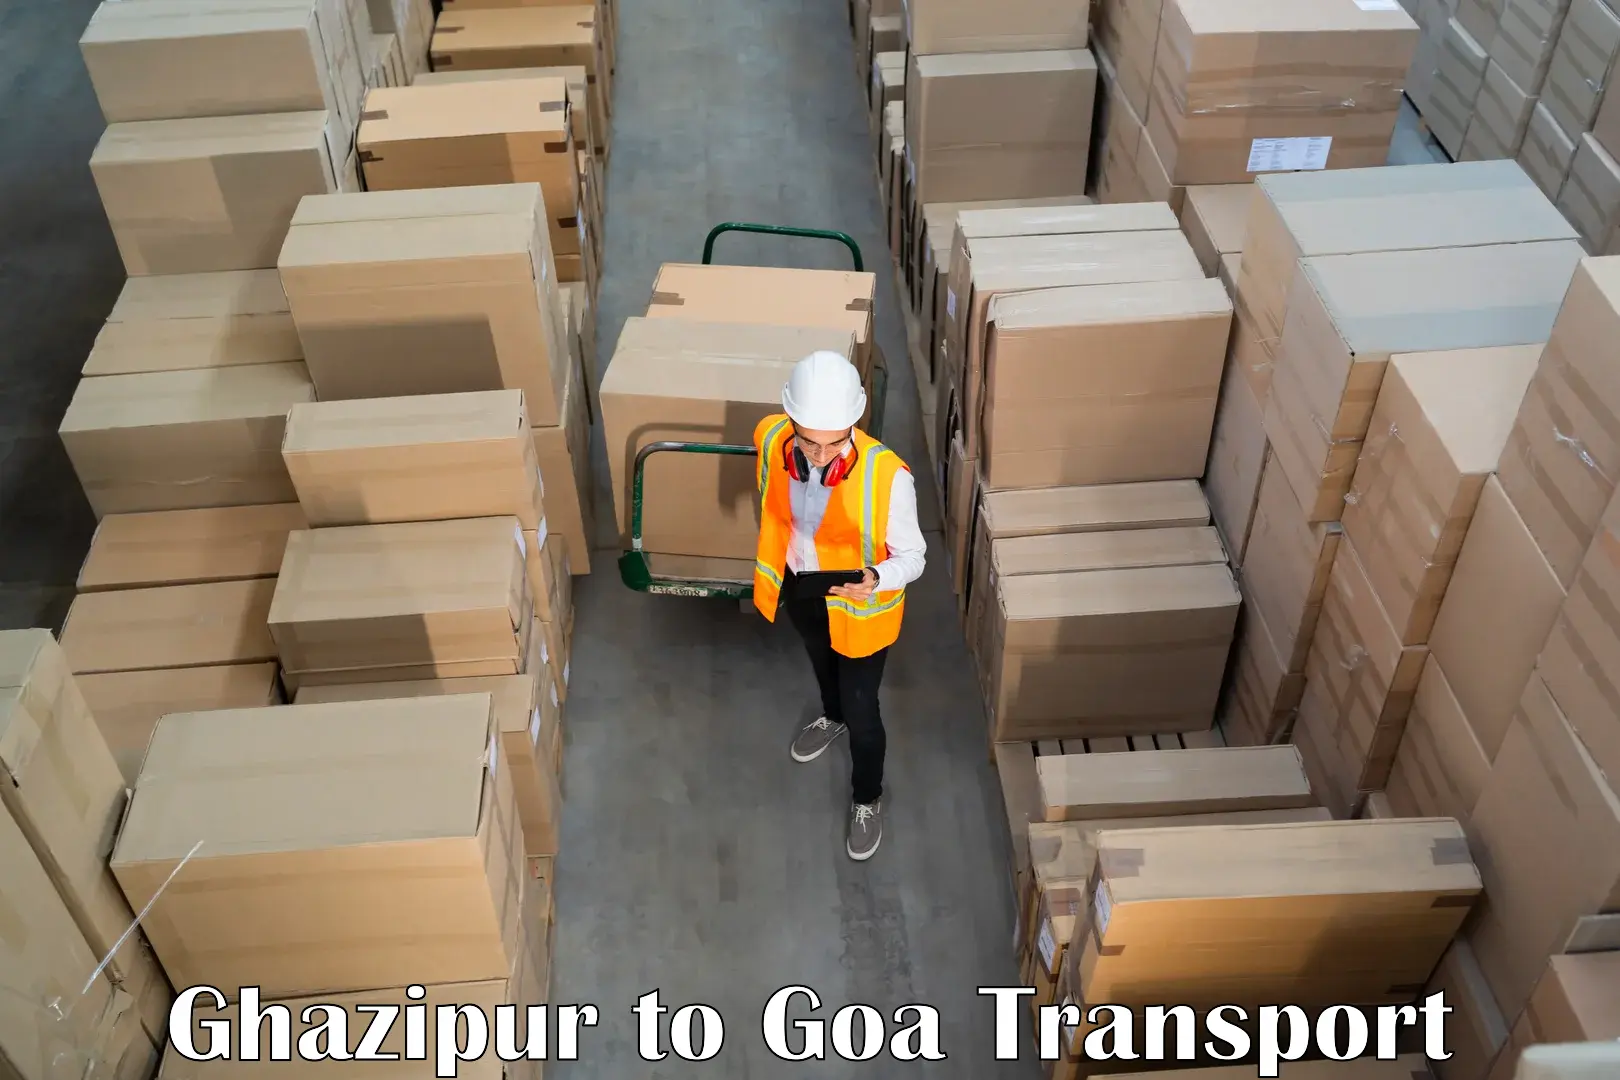 Daily transport service Ghazipur to South Goa